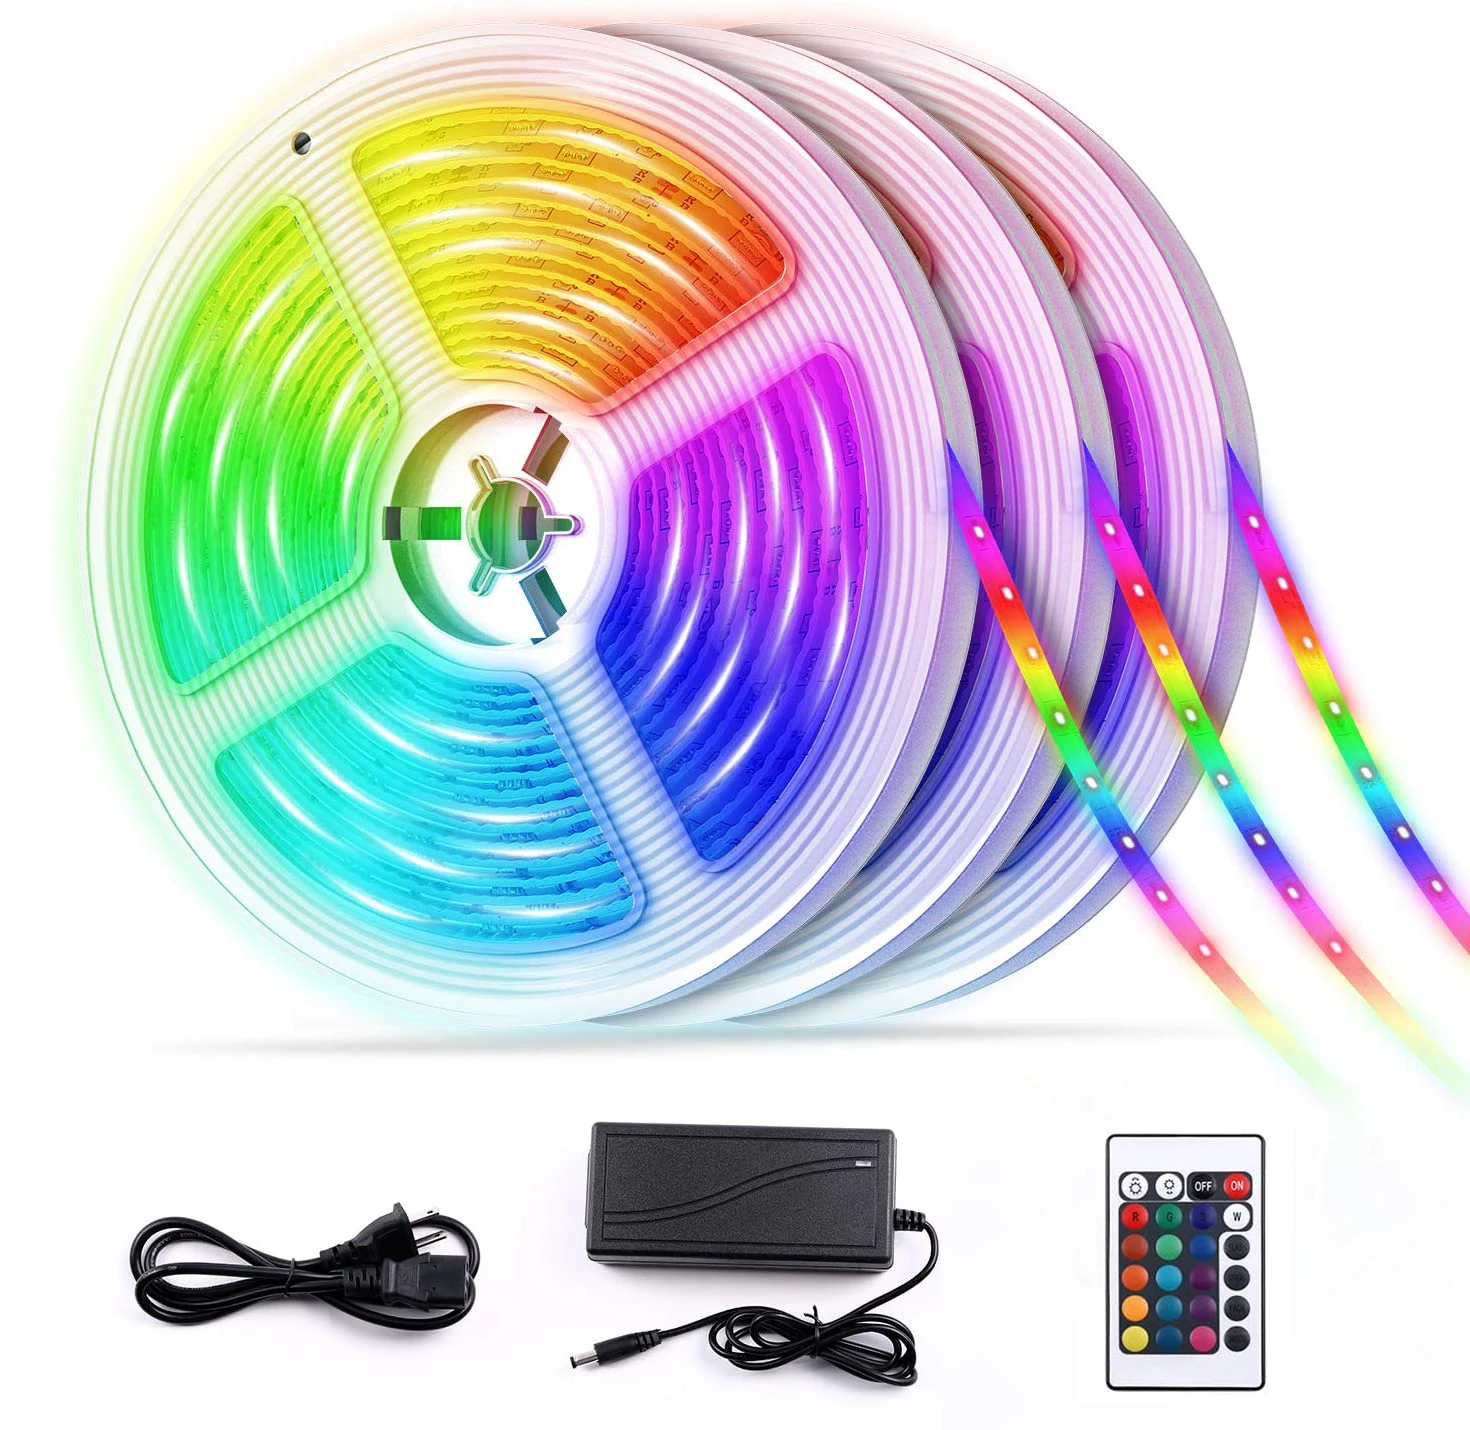 Mini Flexible Home Room Bedroom 5M 2835 Smd Ip 65 Rgb Smart Waterproof Led Strip Light With Remote Control